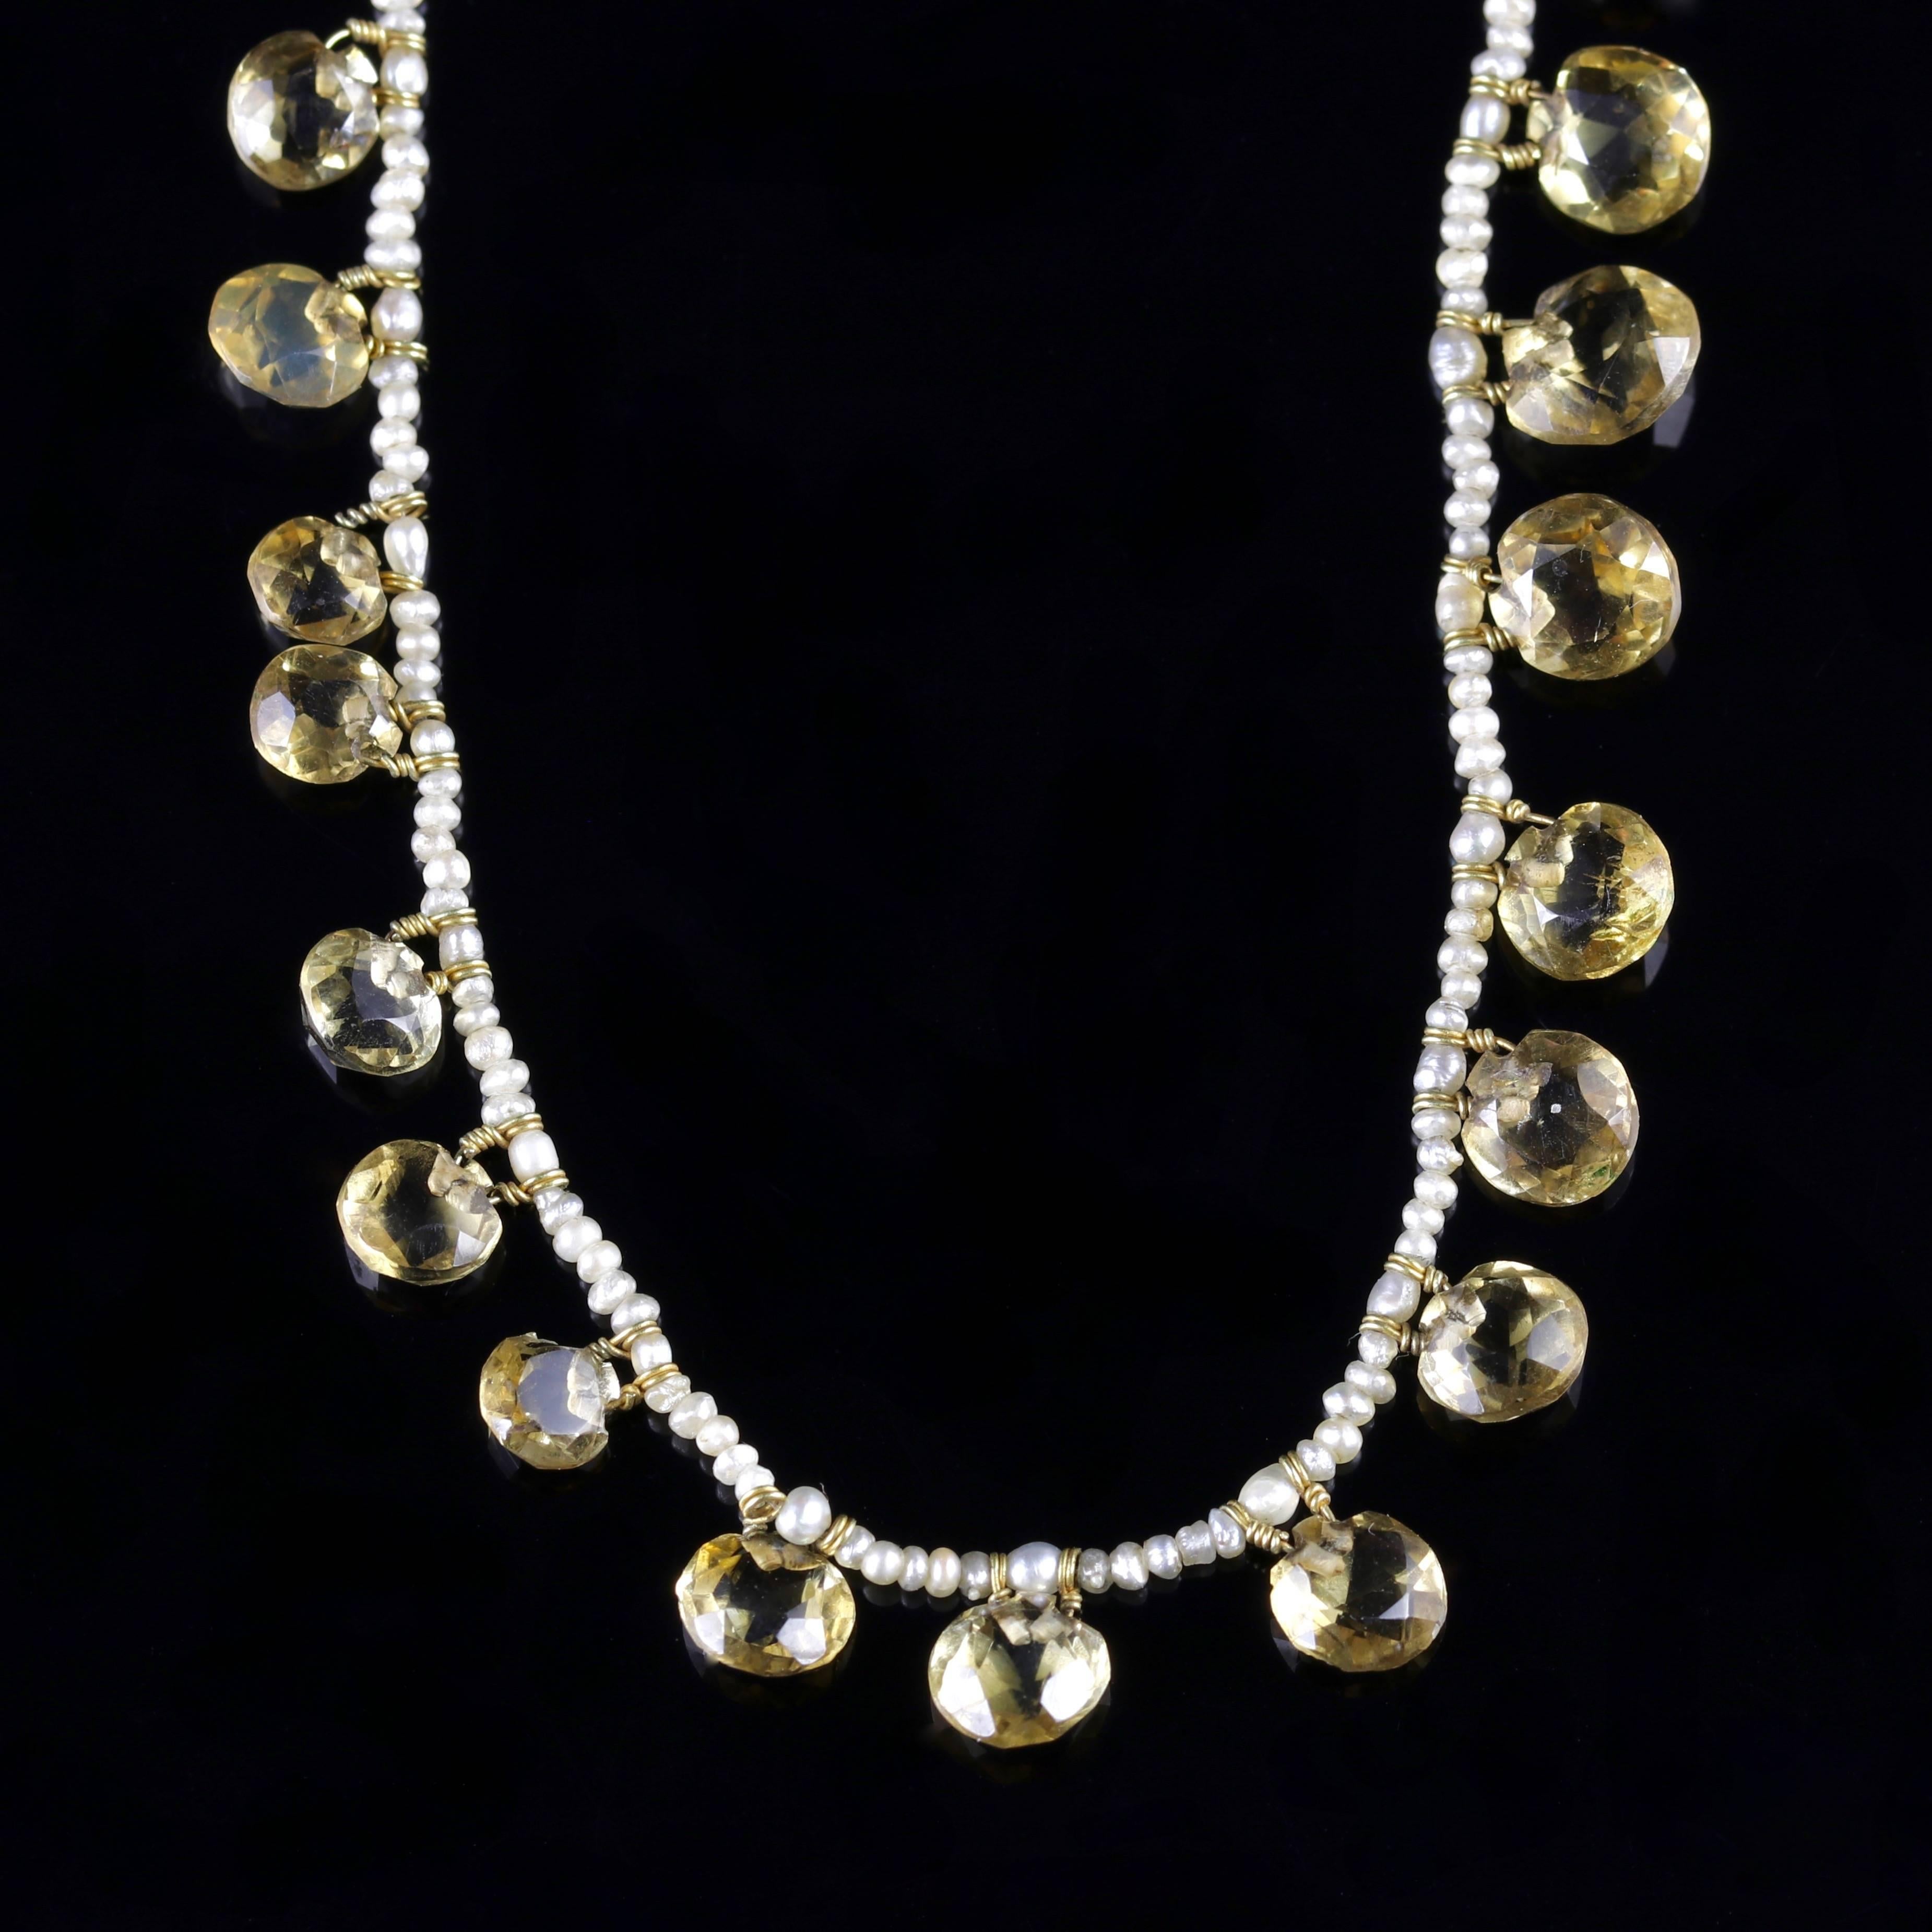 This very beautiful Citrine and natural Pearl necklace is Circa 1870.

Twenty five hand cut Citrines cascade around the garland Pearl necklace.

The Citrine’s sparkle and have a crisp, radiant quality about them. 

The name Citrine is derived from